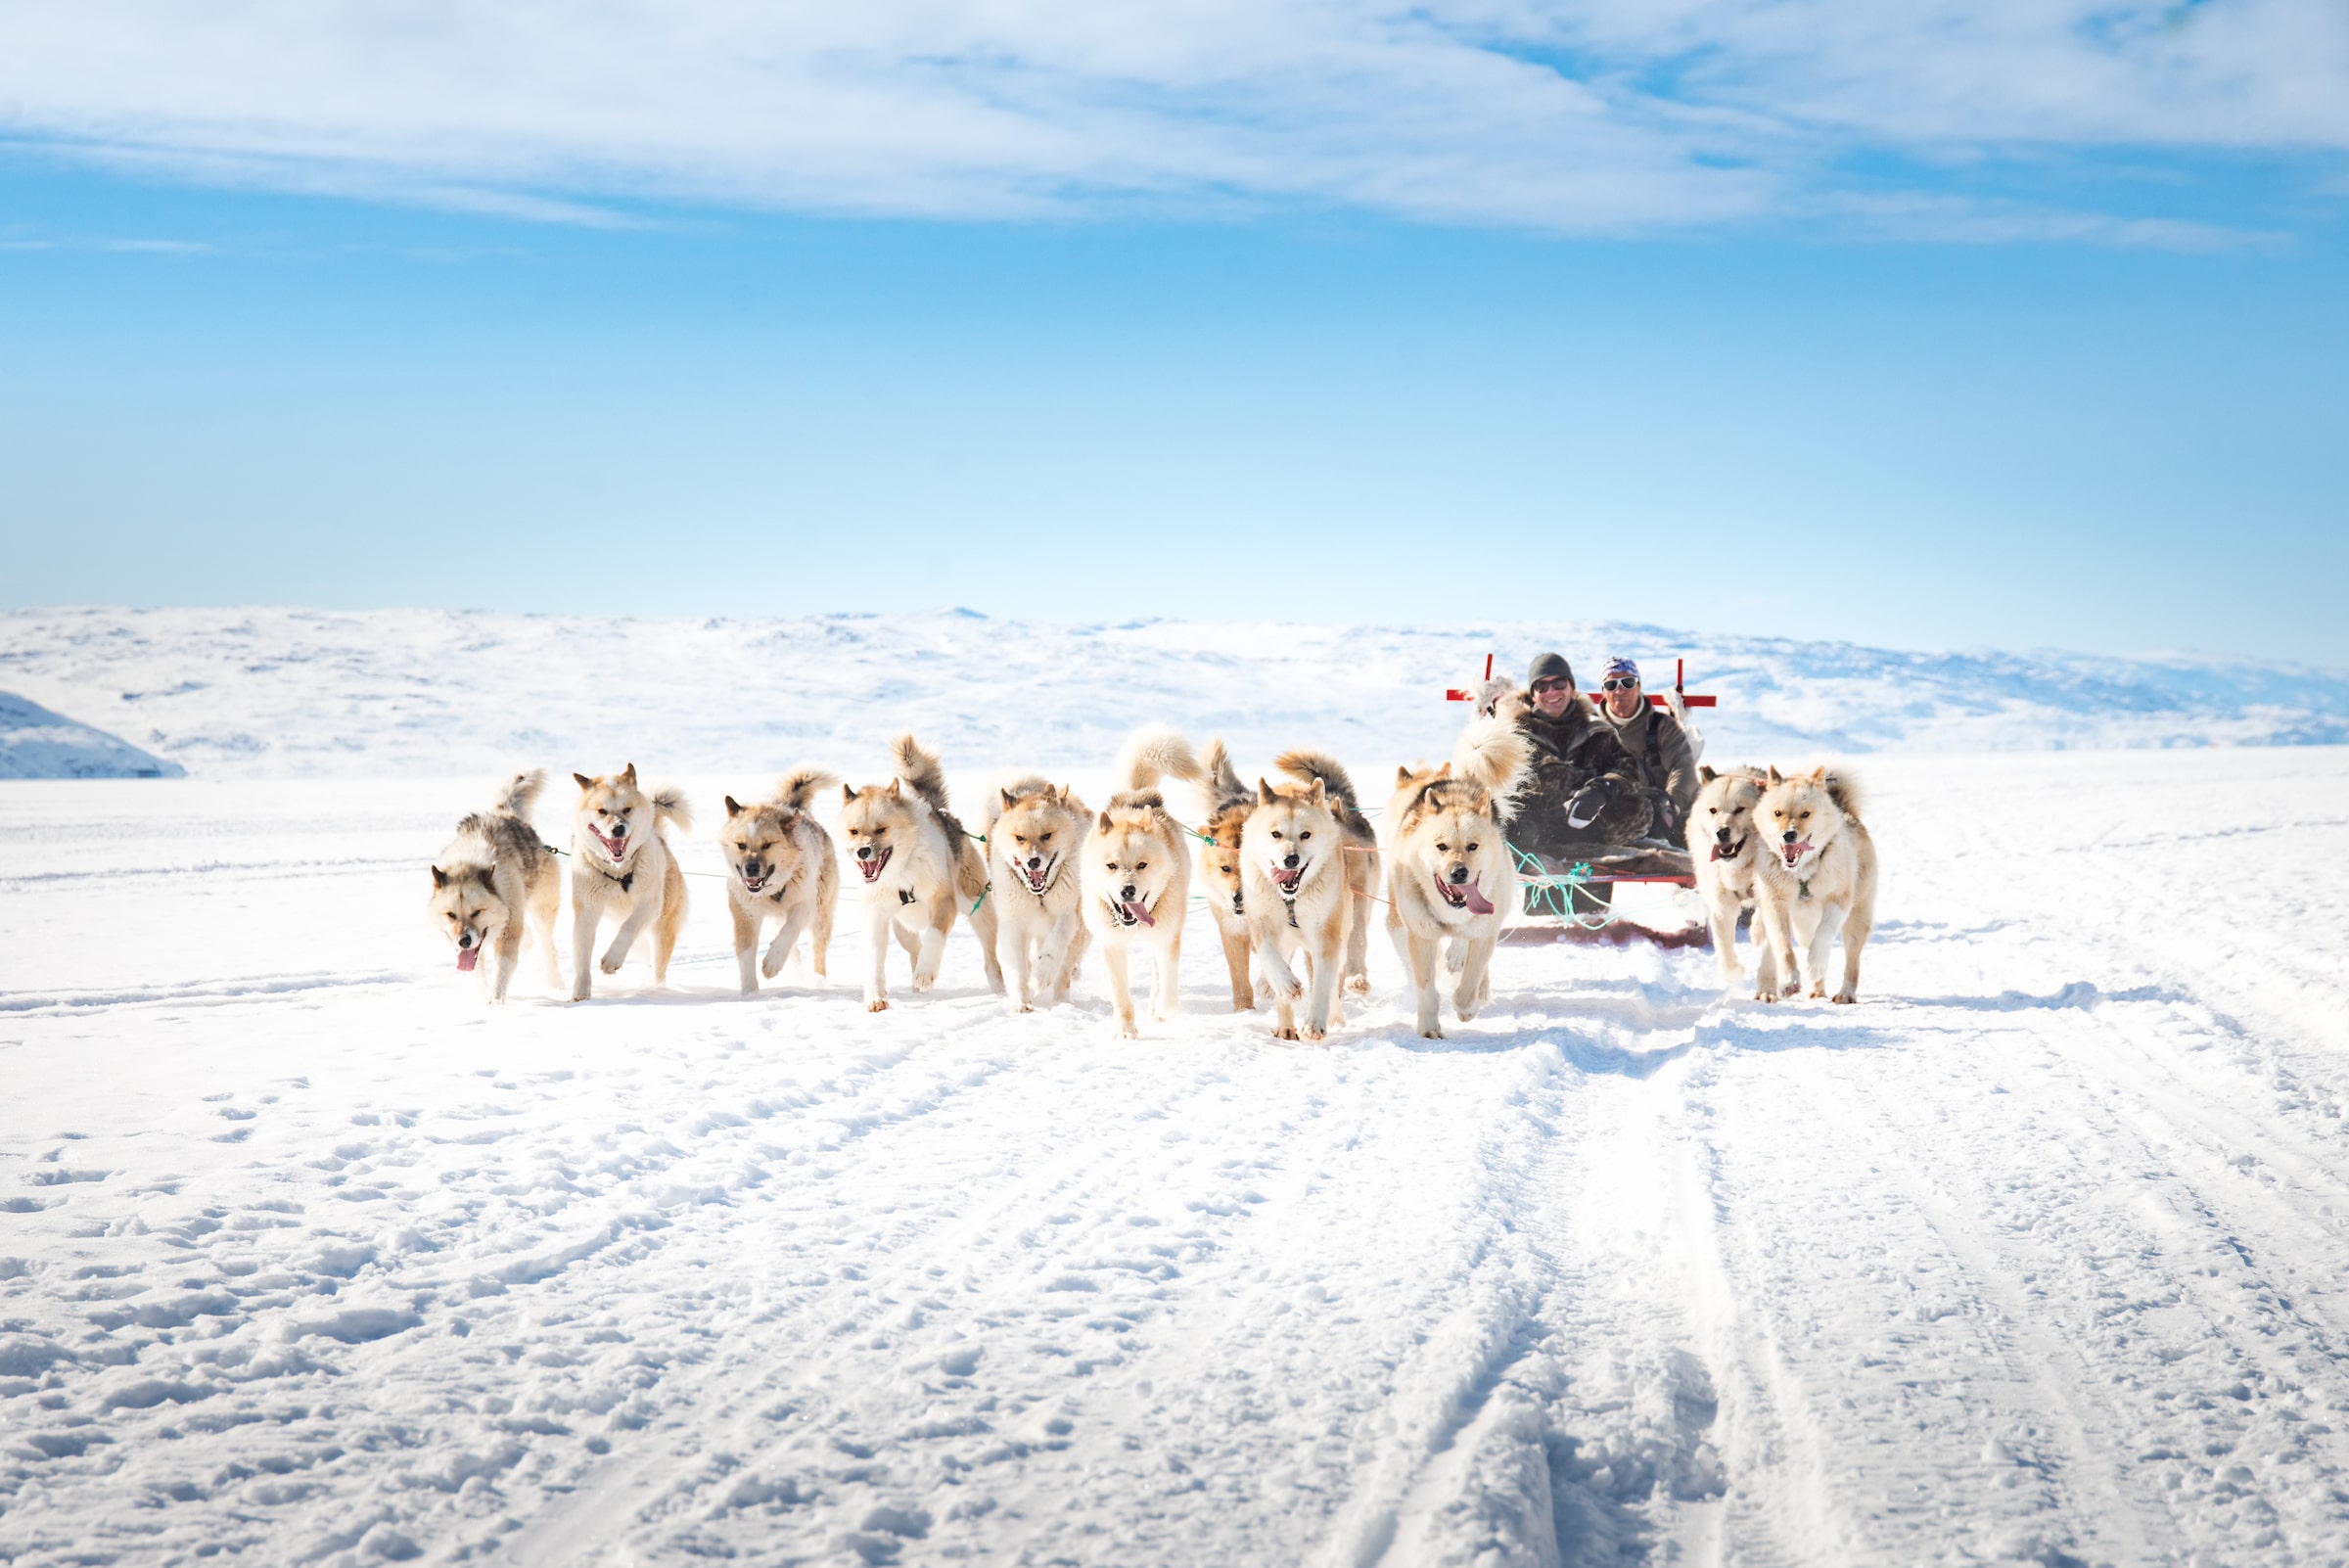 Dogsledding in Kangerlussuaq. Photo by Anders Beier - Visit Greenland